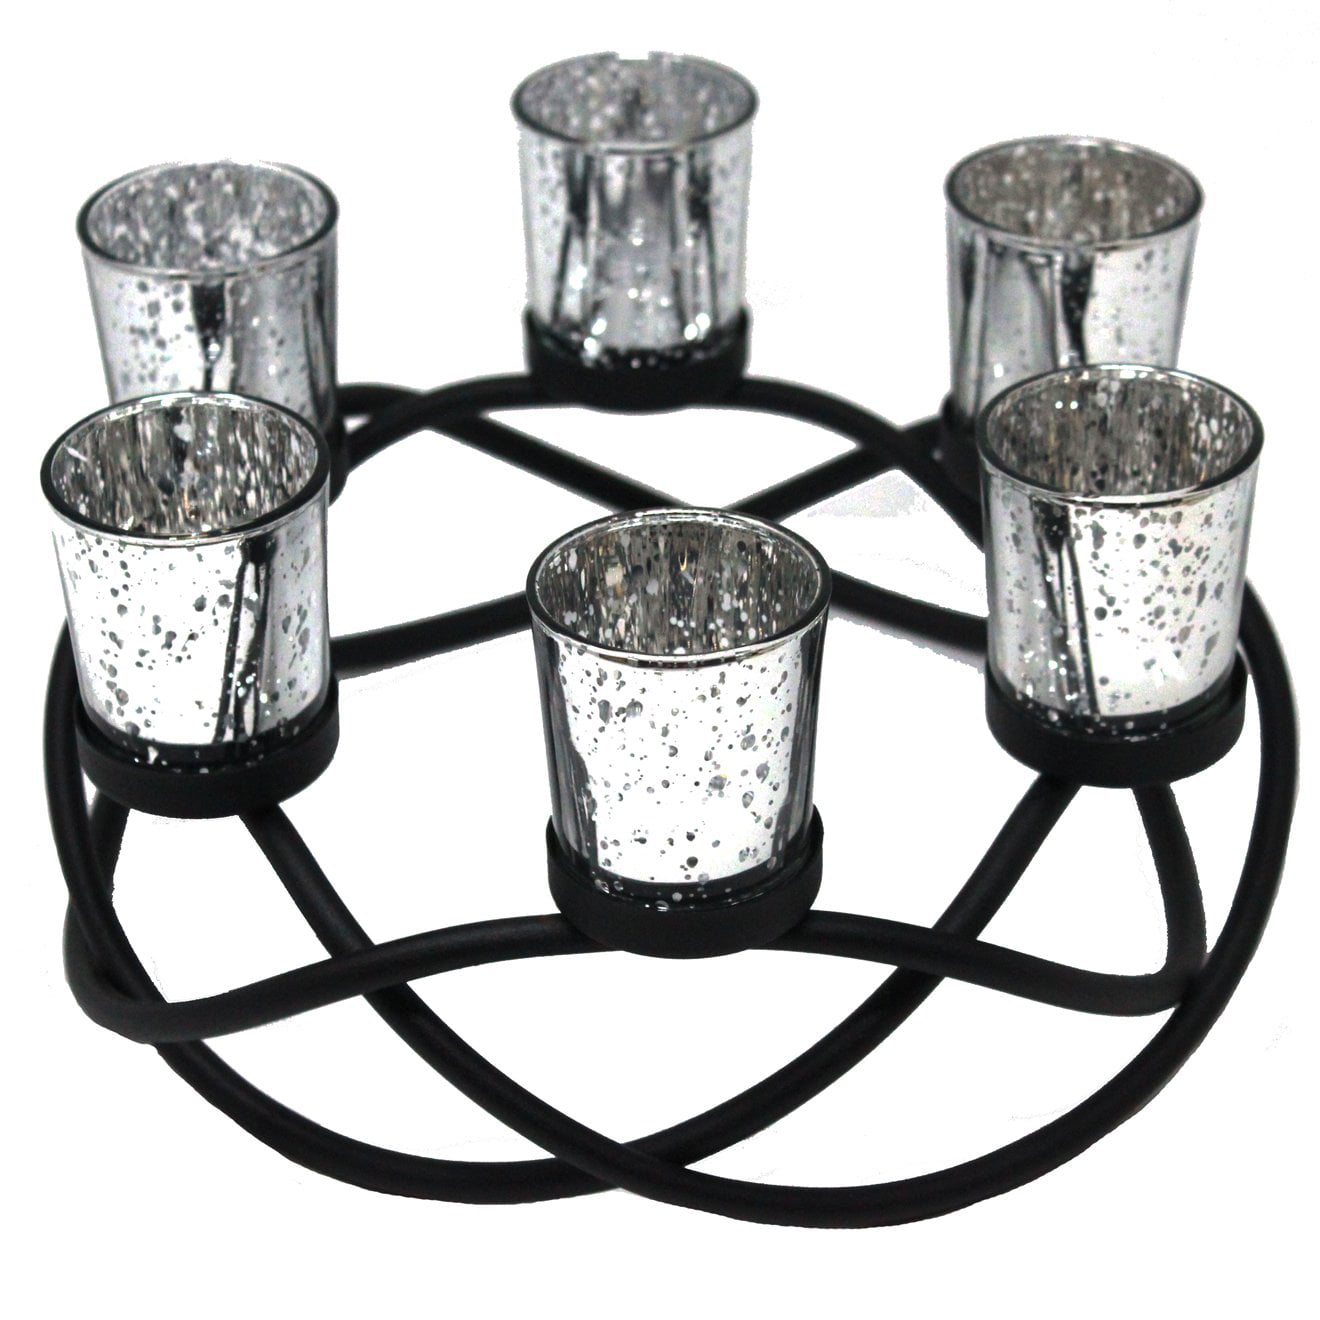 IWOWHERO 10pcs Metal Candle Cup Decor Candles Aluminum Tray Christmas  Candles Candlestick Holder Cup Metal Candle Holder Tray Metal Candle  Inserts Cup